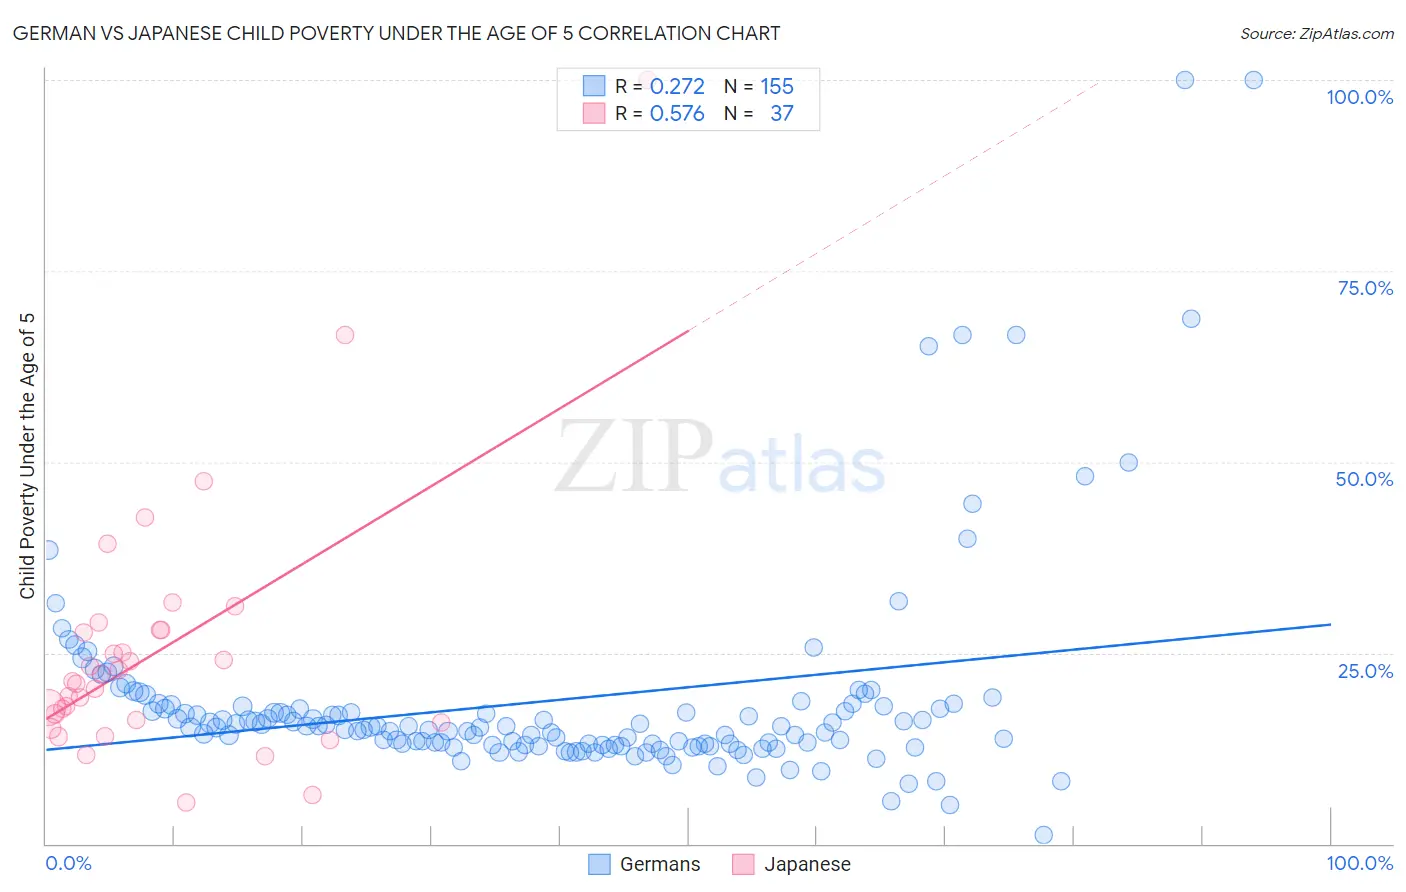 German vs Japanese Child Poverty Under the Age of 5